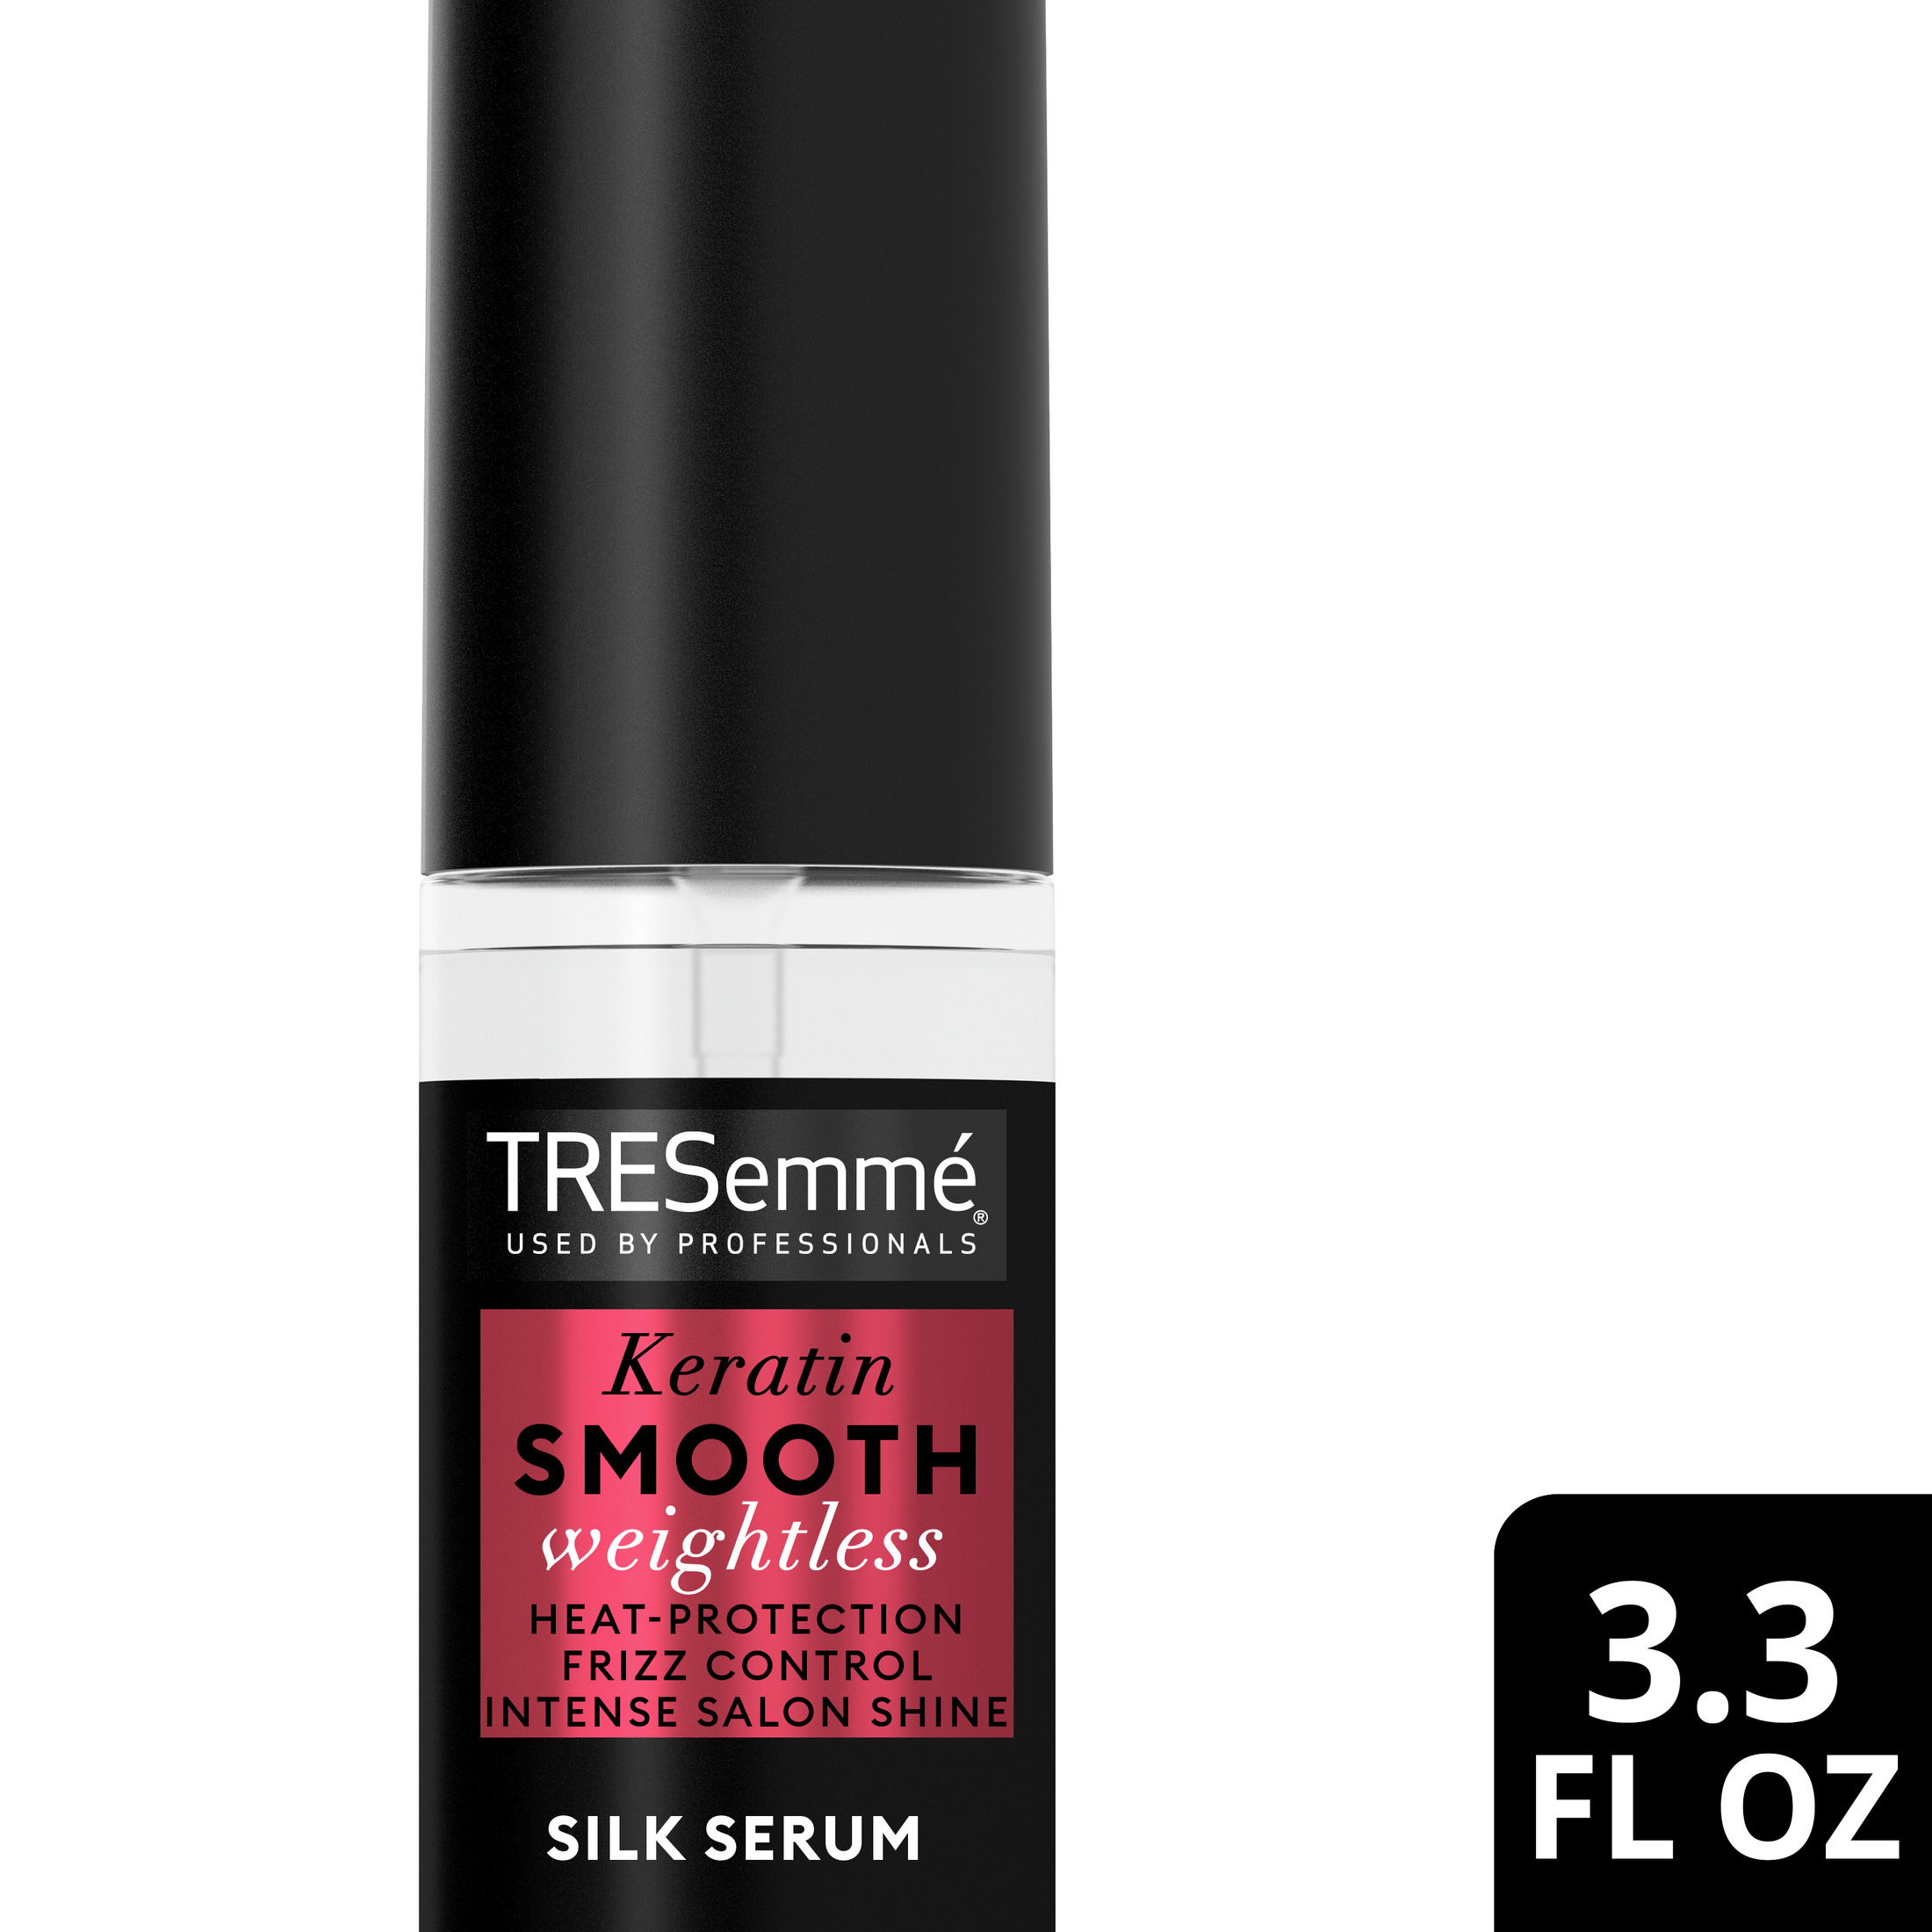 TRESemme Keratin Smooth Detangling Hair Serum for Shine Heat Protection & Frizz Control, 3.3 fl oz - image 3 of 11